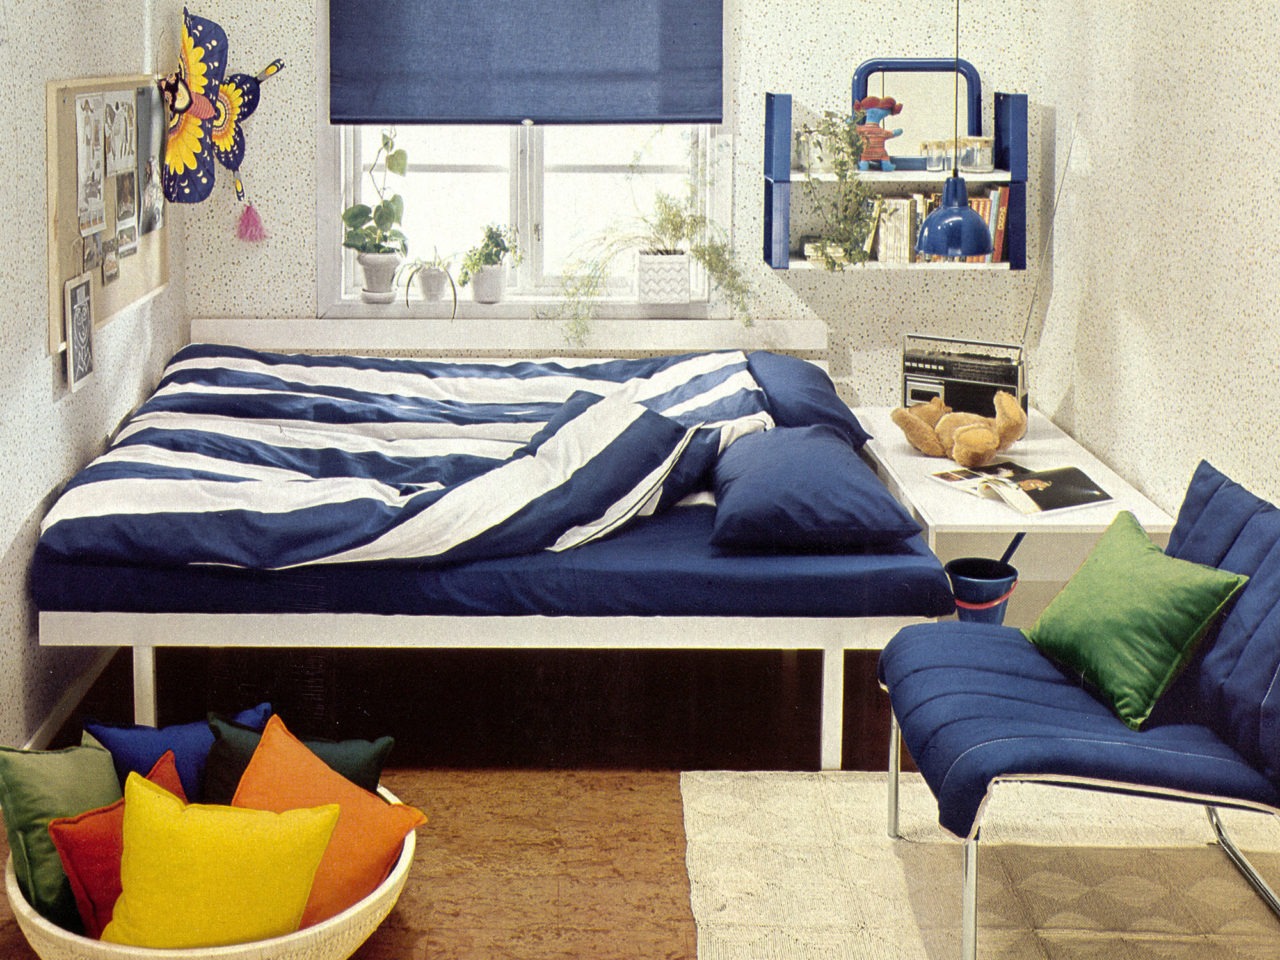 A light room with a small-dot pattern on the walls, cork flooring, blue and white striped bed linen, and blue details and textiles.